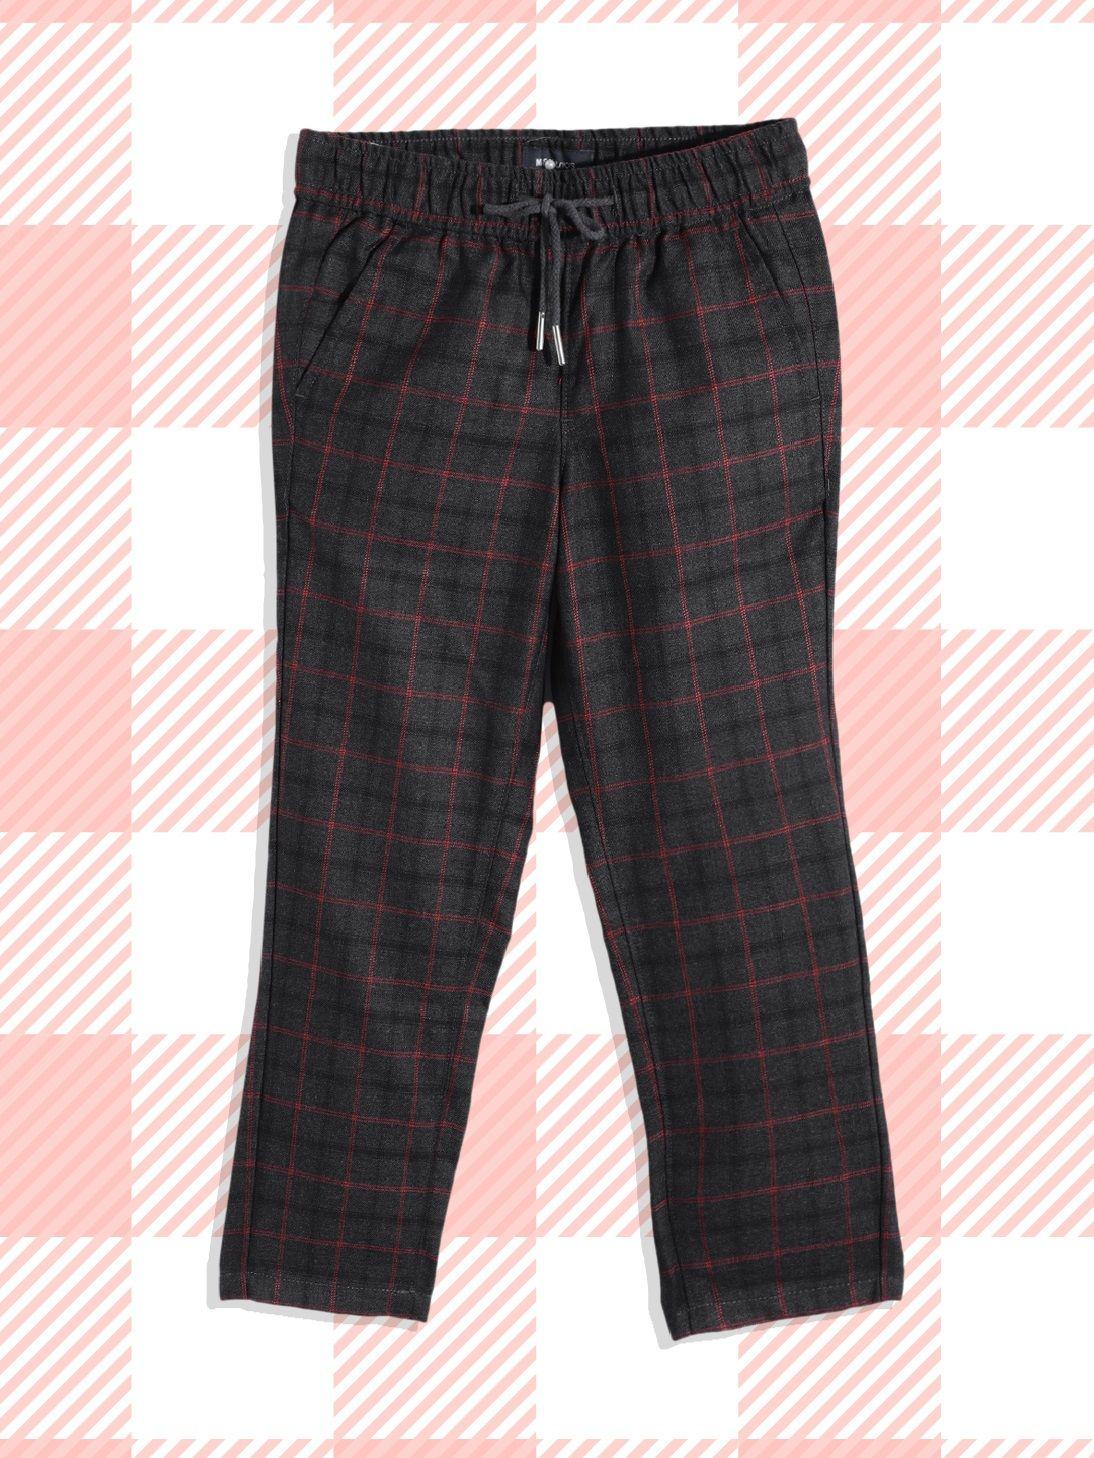 m&h juniors boys charcoal grey & red checked trousers